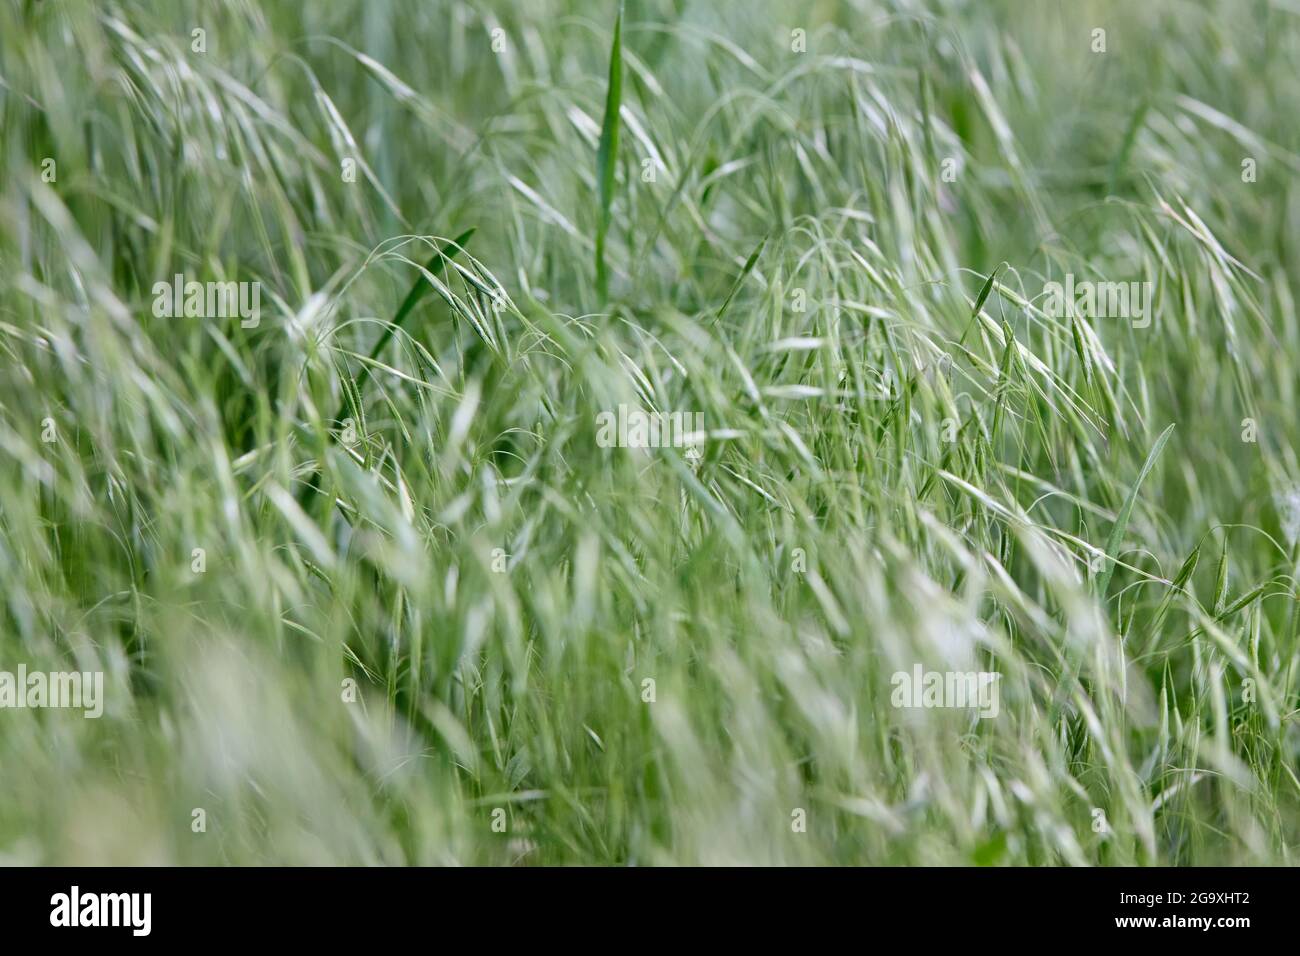 Bromus tectorum, downy brome, drooping brome or cheatgrass selective focus closeup macro grass rural background in wild nature shallow focus with Stock Photo